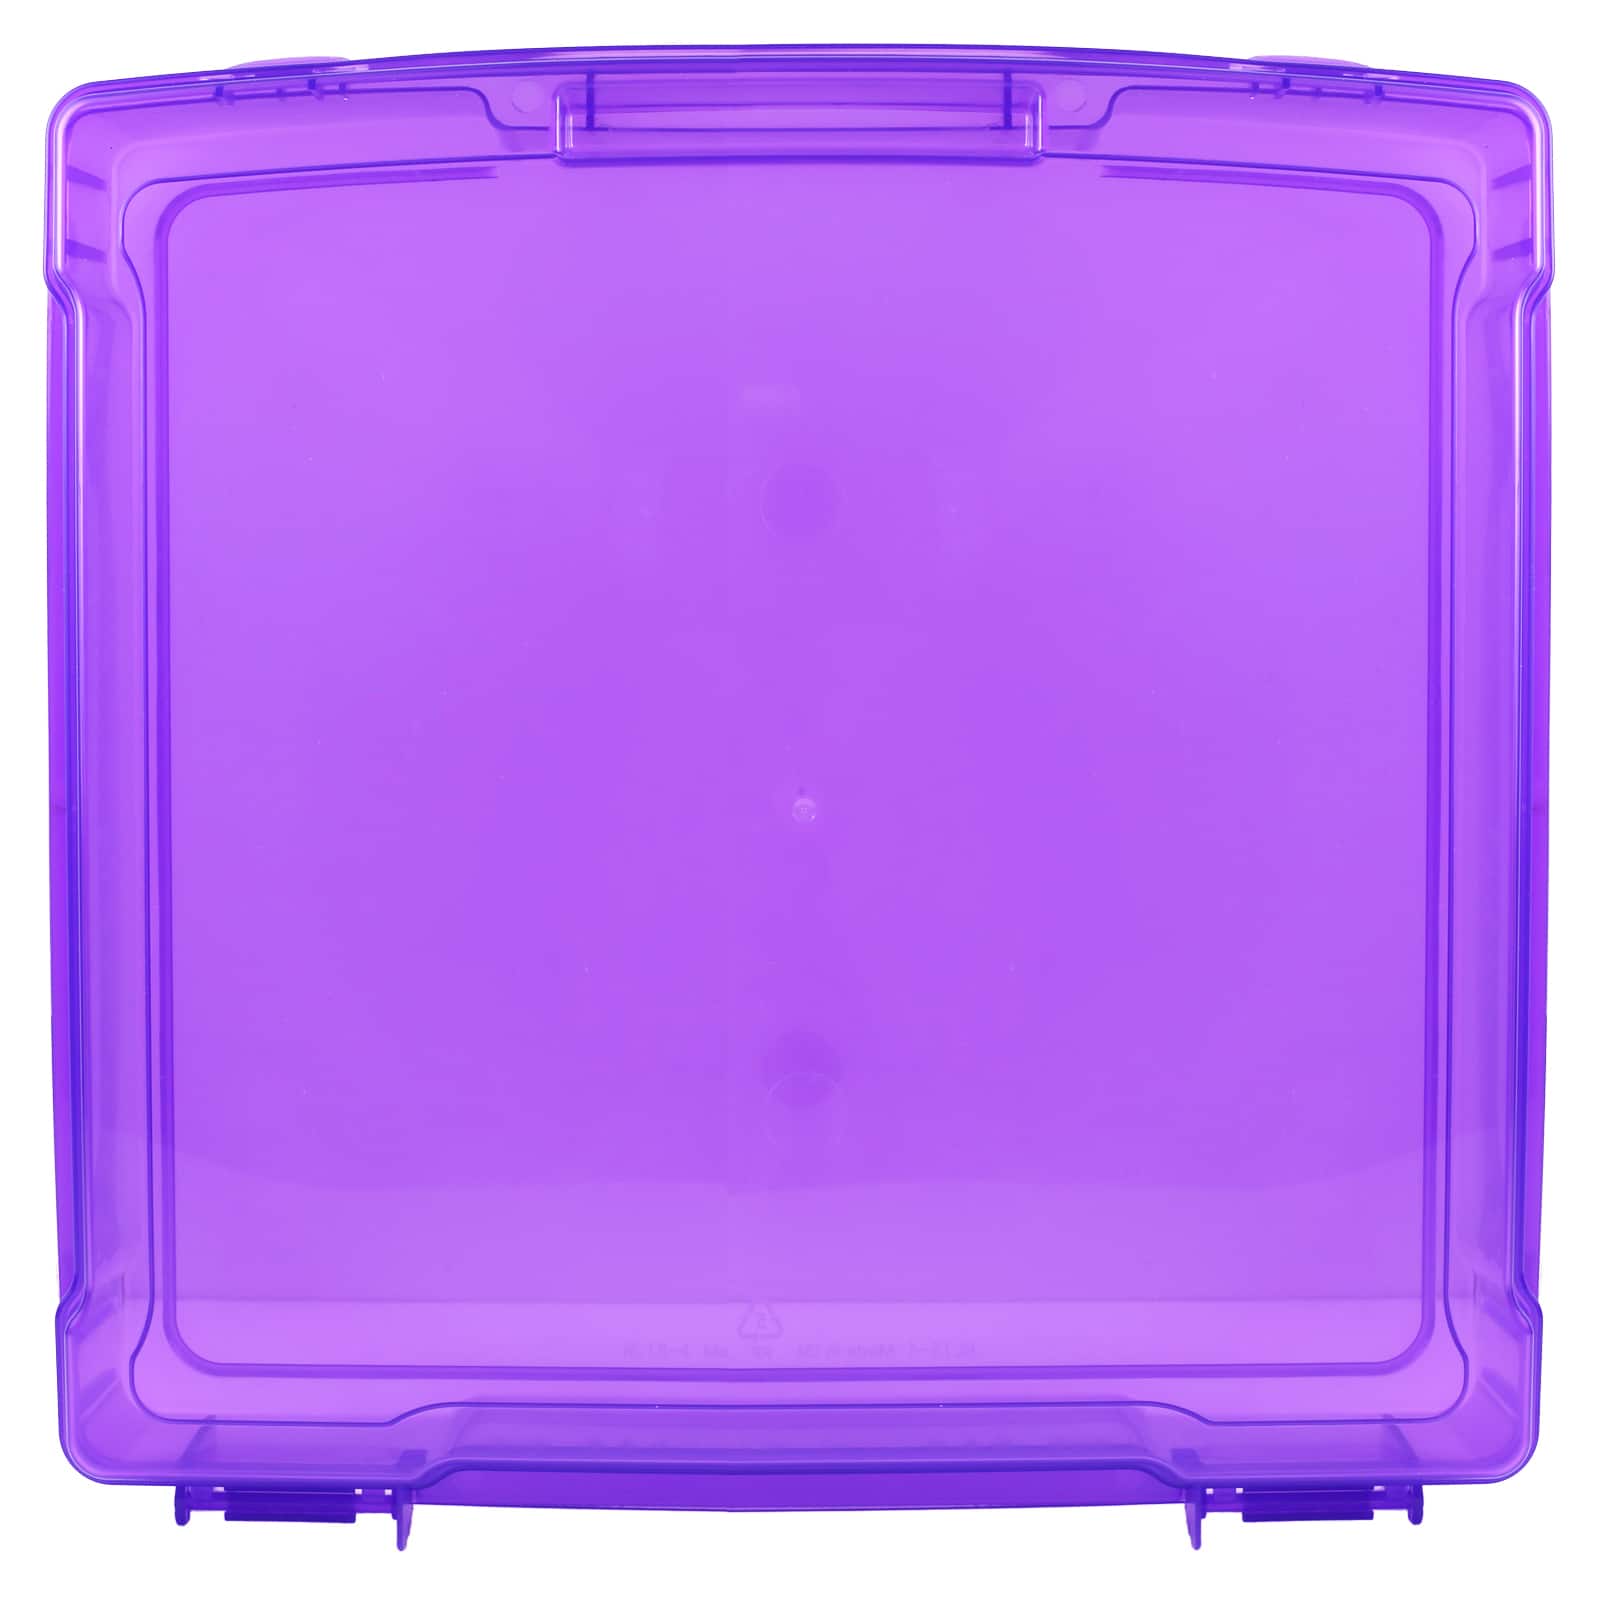 Large Photo Storage Box,Plastic Box, Storage Box with Lid, Transparent  Photo Boxes for Crafts, Small Items, Capacity for 300 Photos, 20x14.5x3cm